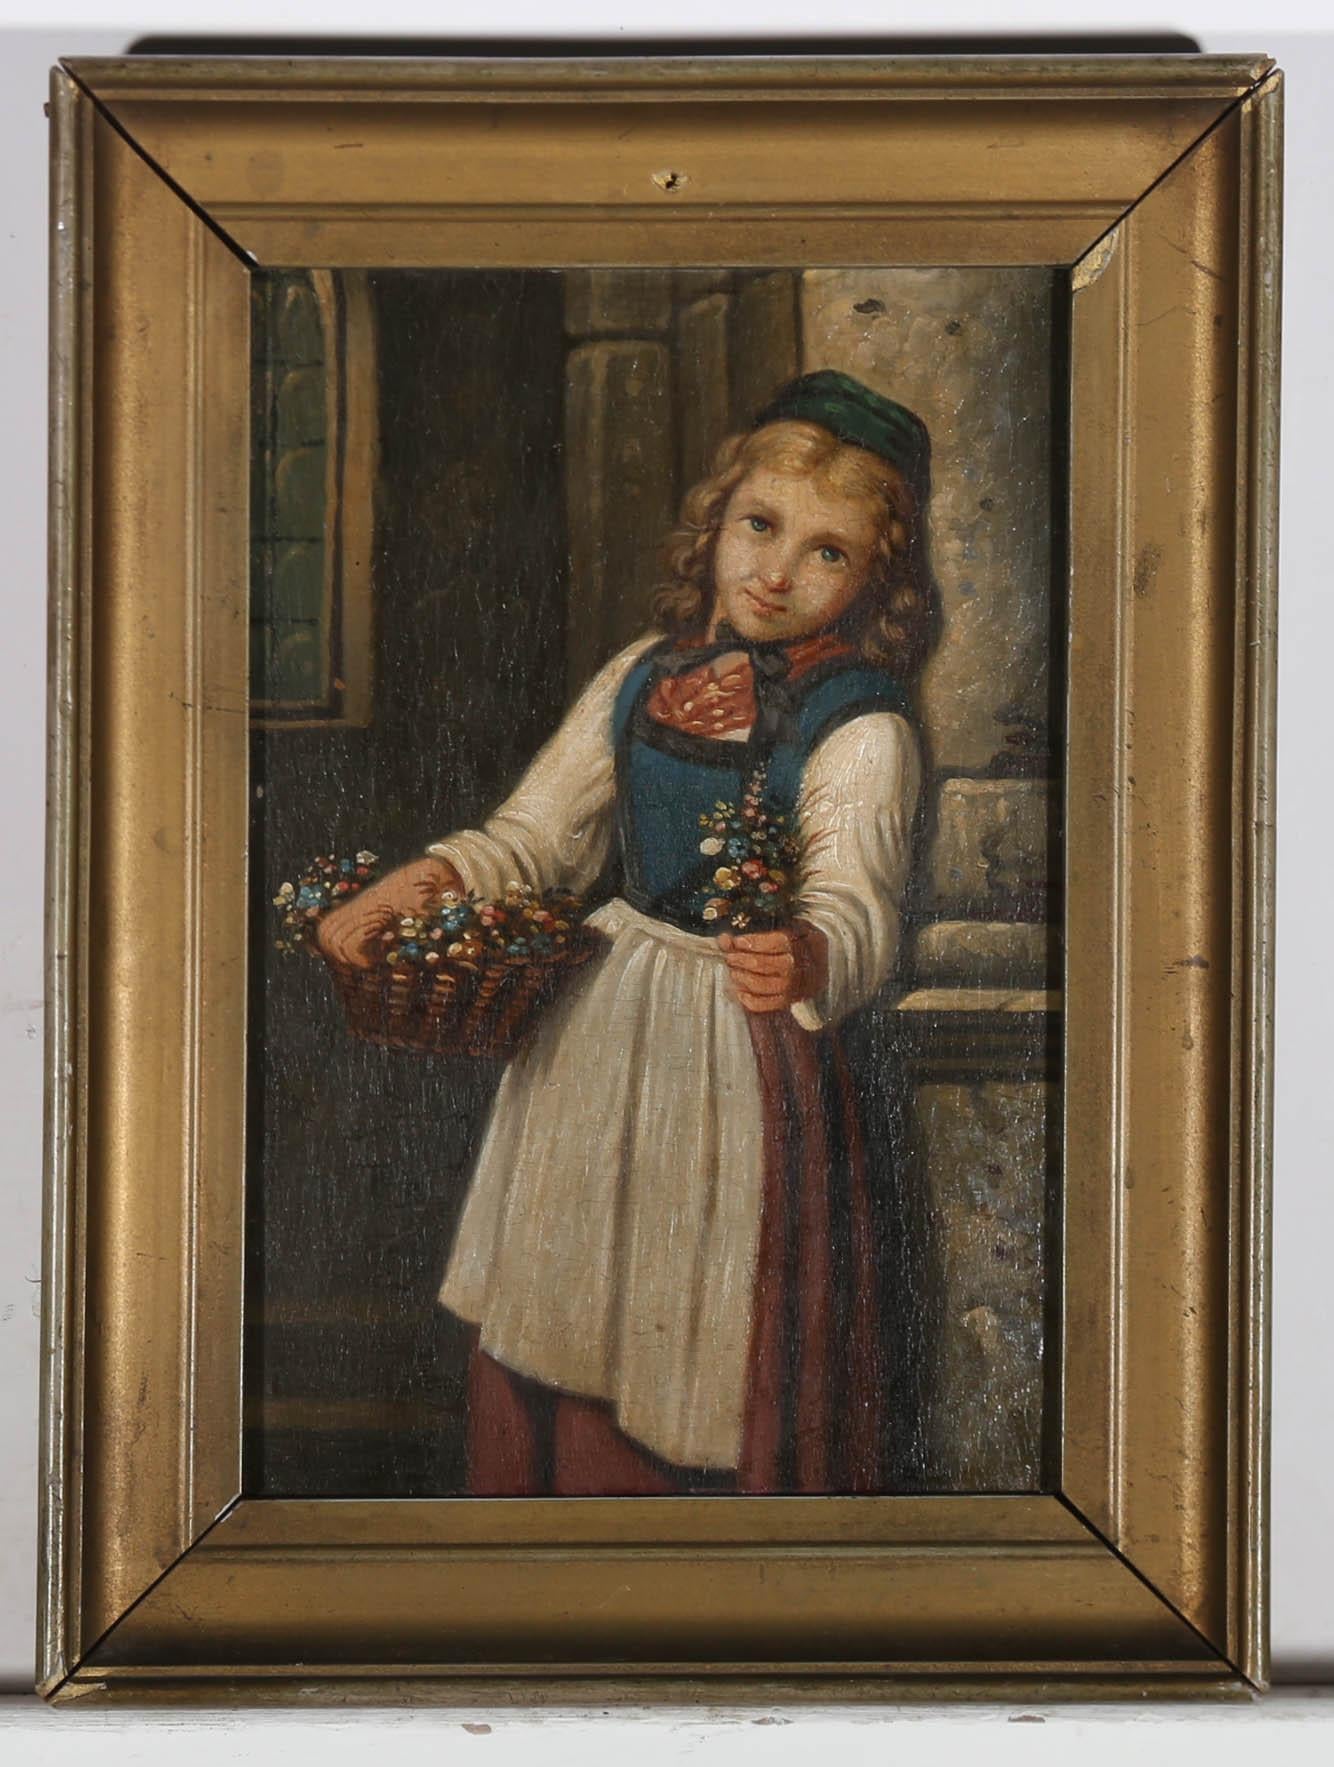 A delightful portrait of a young Victorian girl selling posies from a wicker basket. She holds a small bunch out to the viewer, with a kind expression. Unsigned. Presented in a simple gilt frame. On board. 